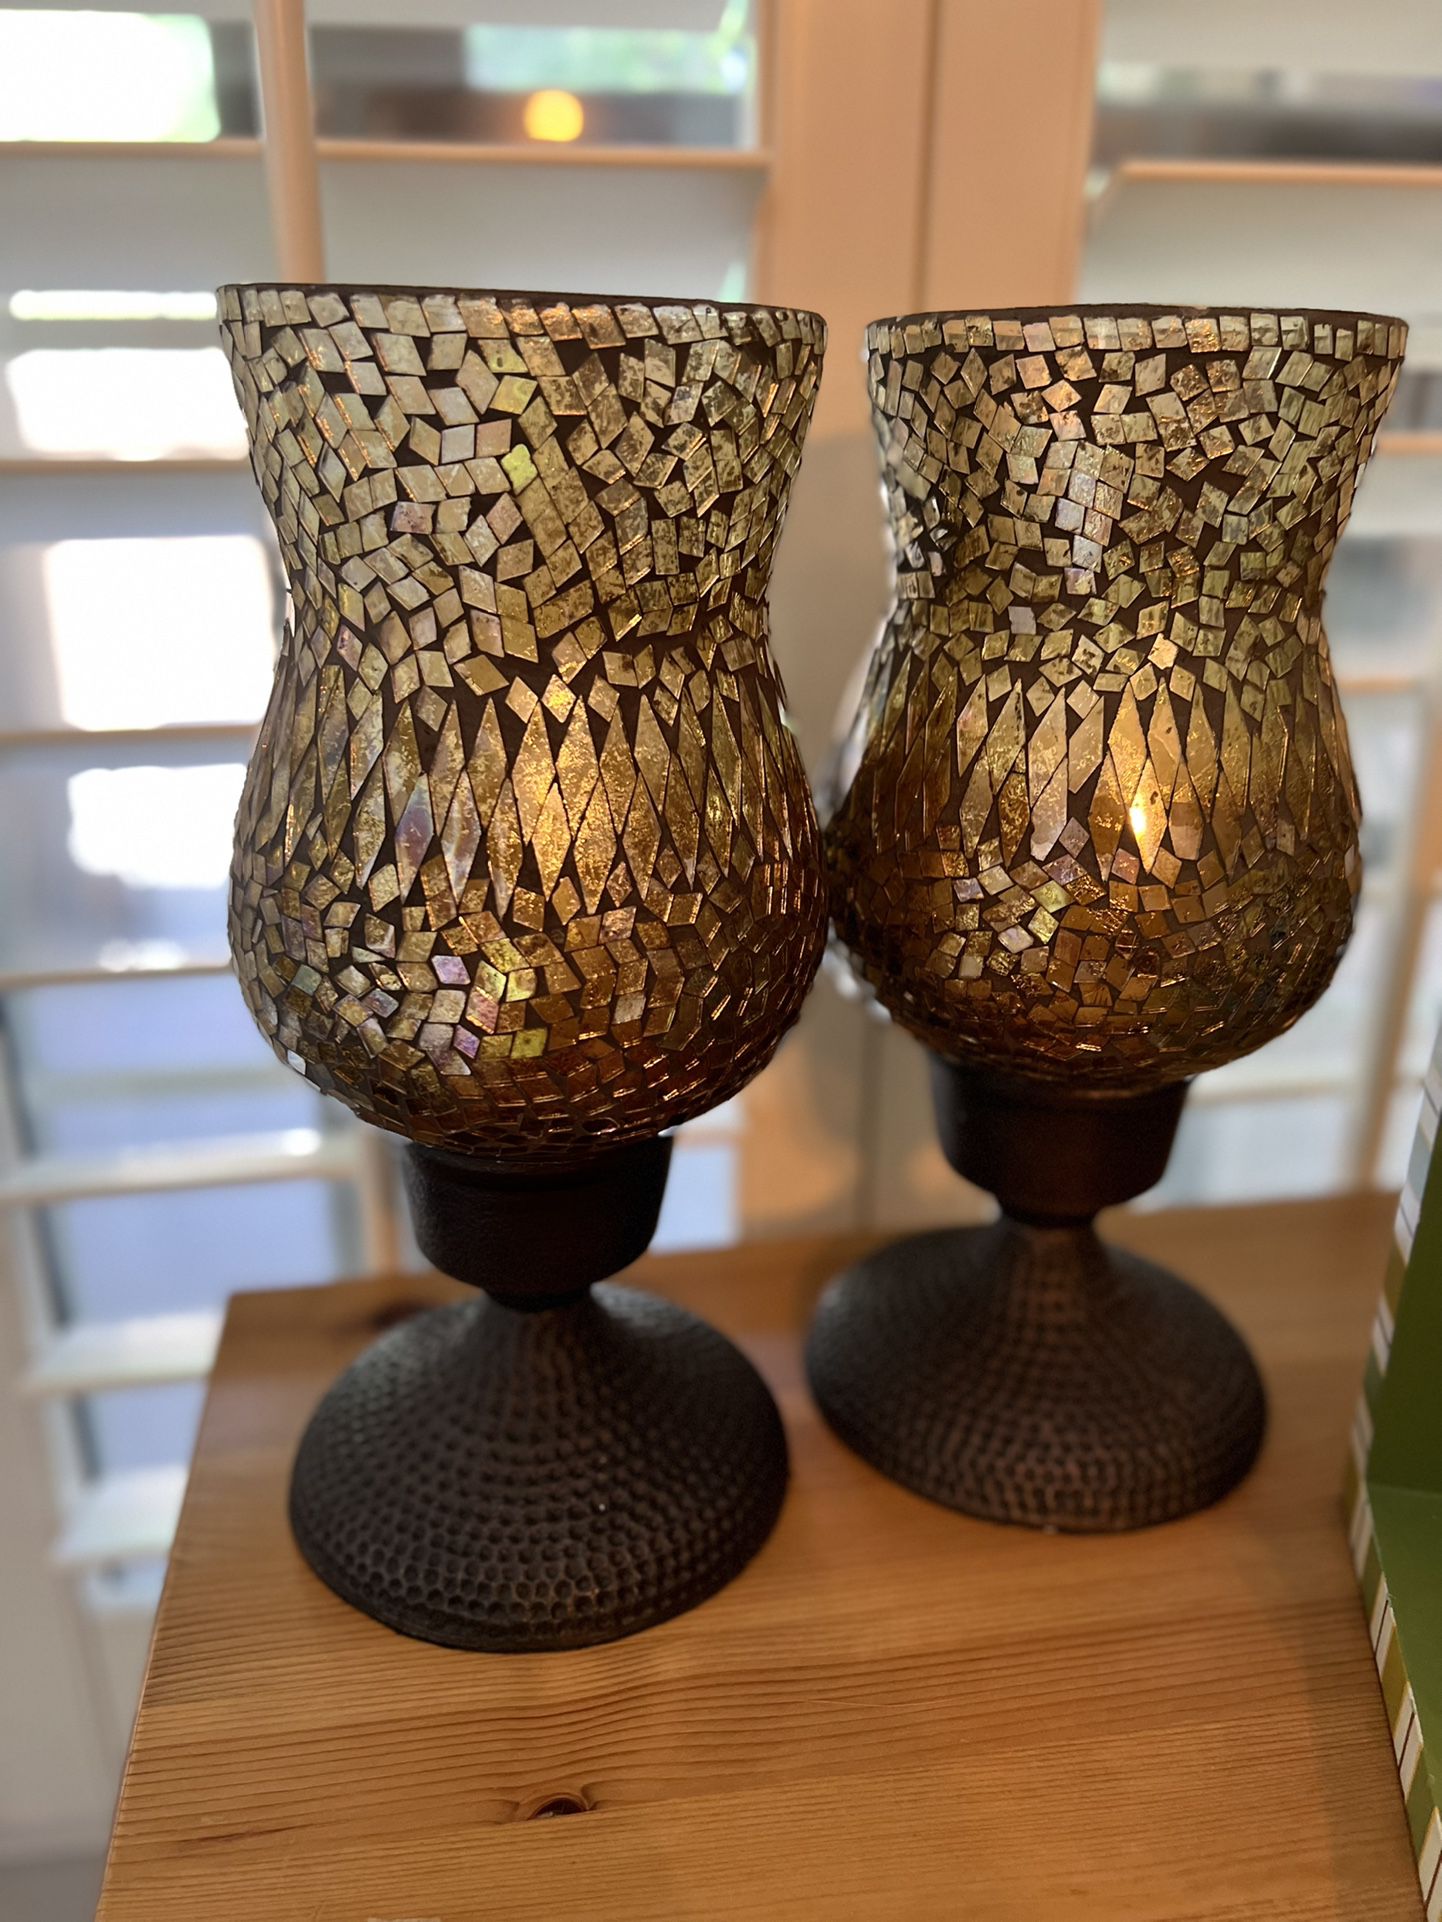 New-Glass Mosiac Pillar Candle Holder- Set Of 2-Includes 2 LED Cream Colored Battery Operated Candles With Purchase  